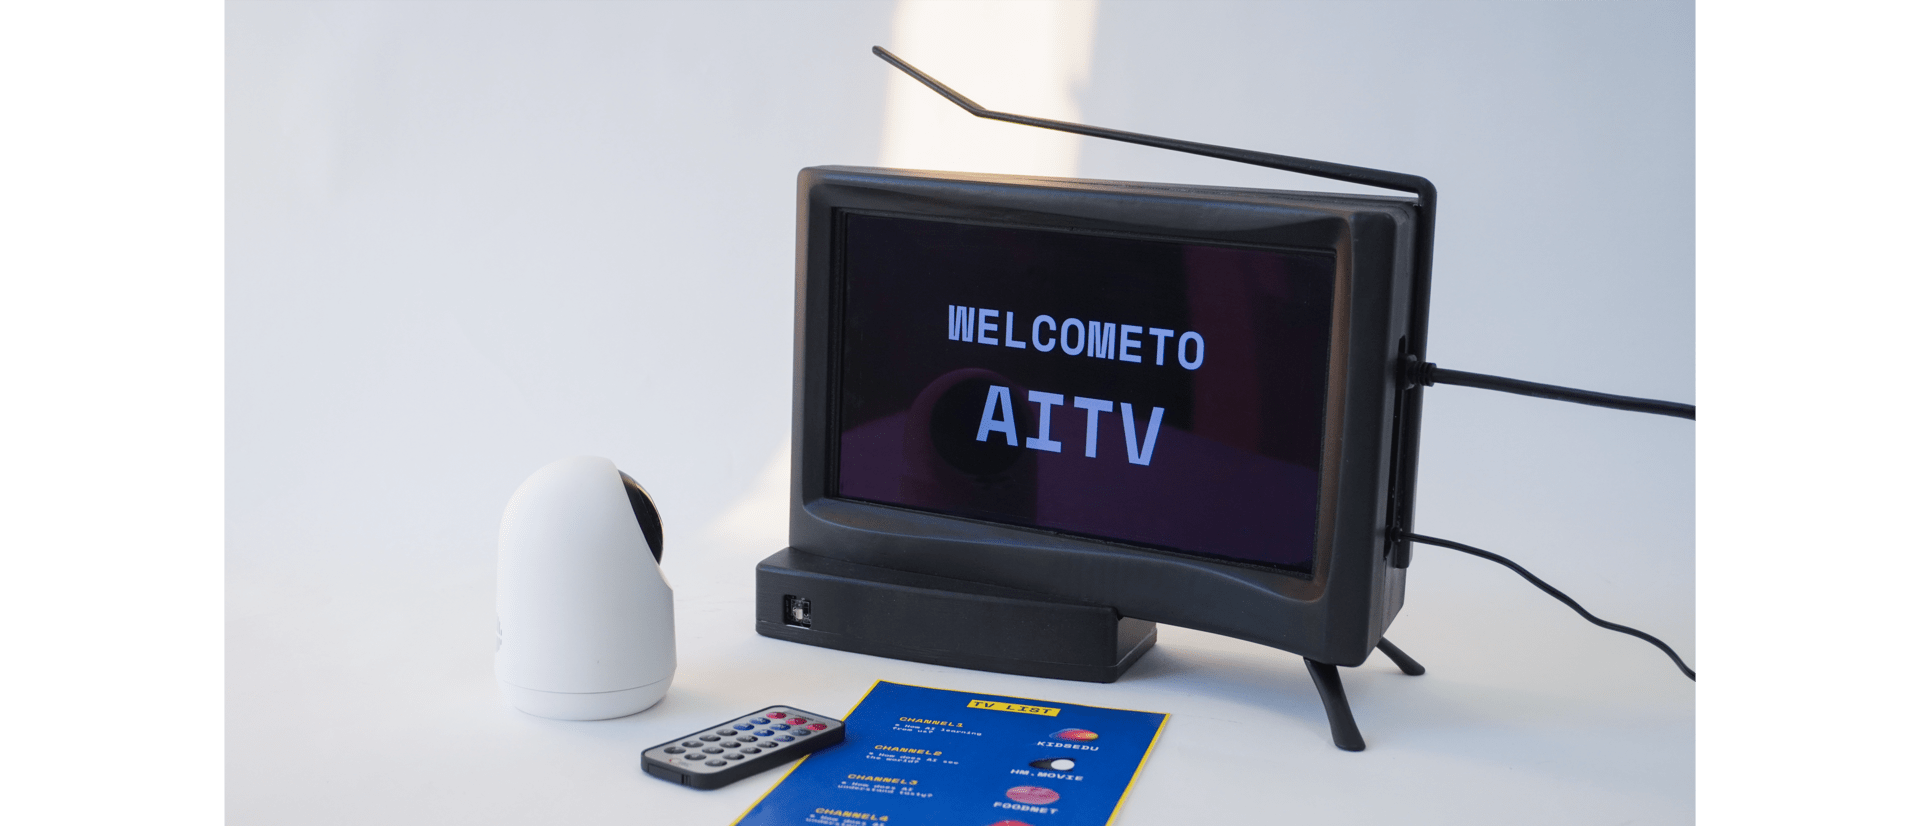 Welcome to AITV